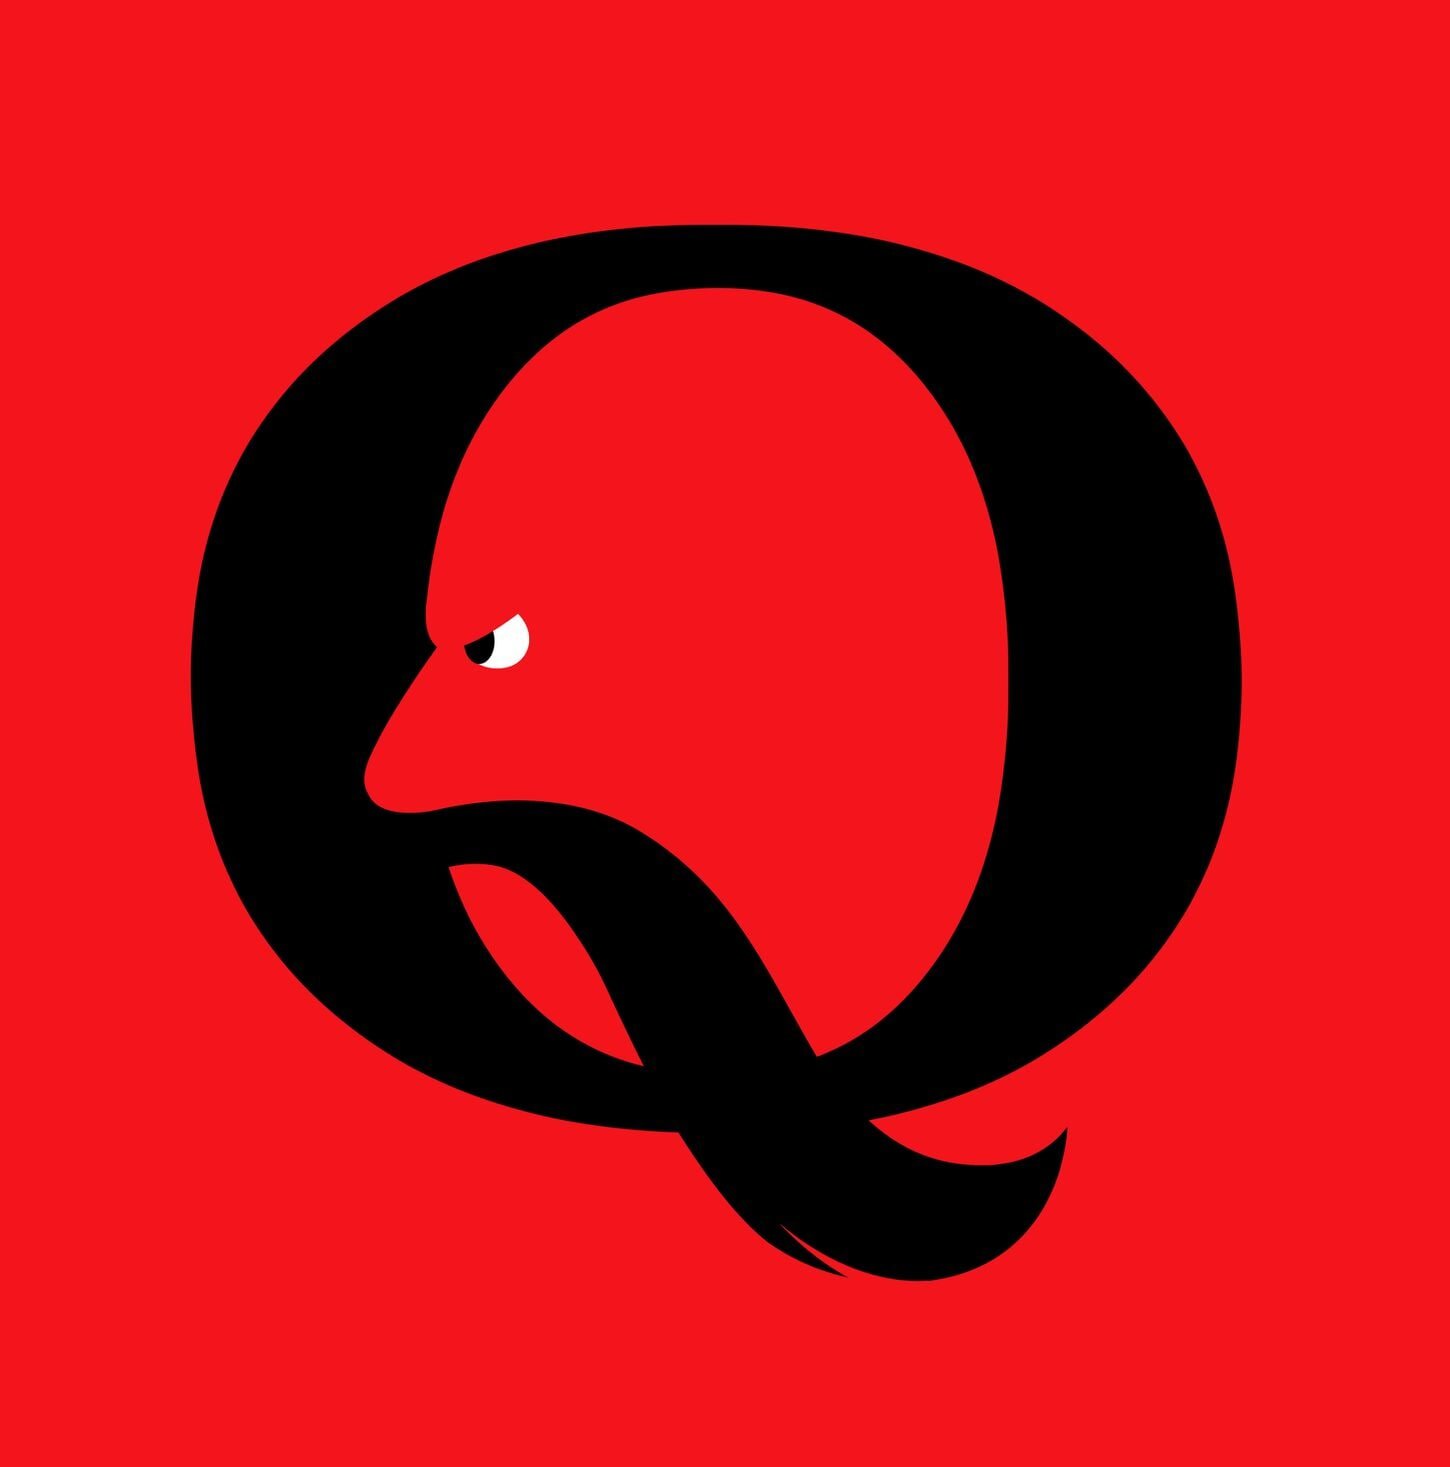 QAnon’s Unexpected Roots in New Age Spirituality